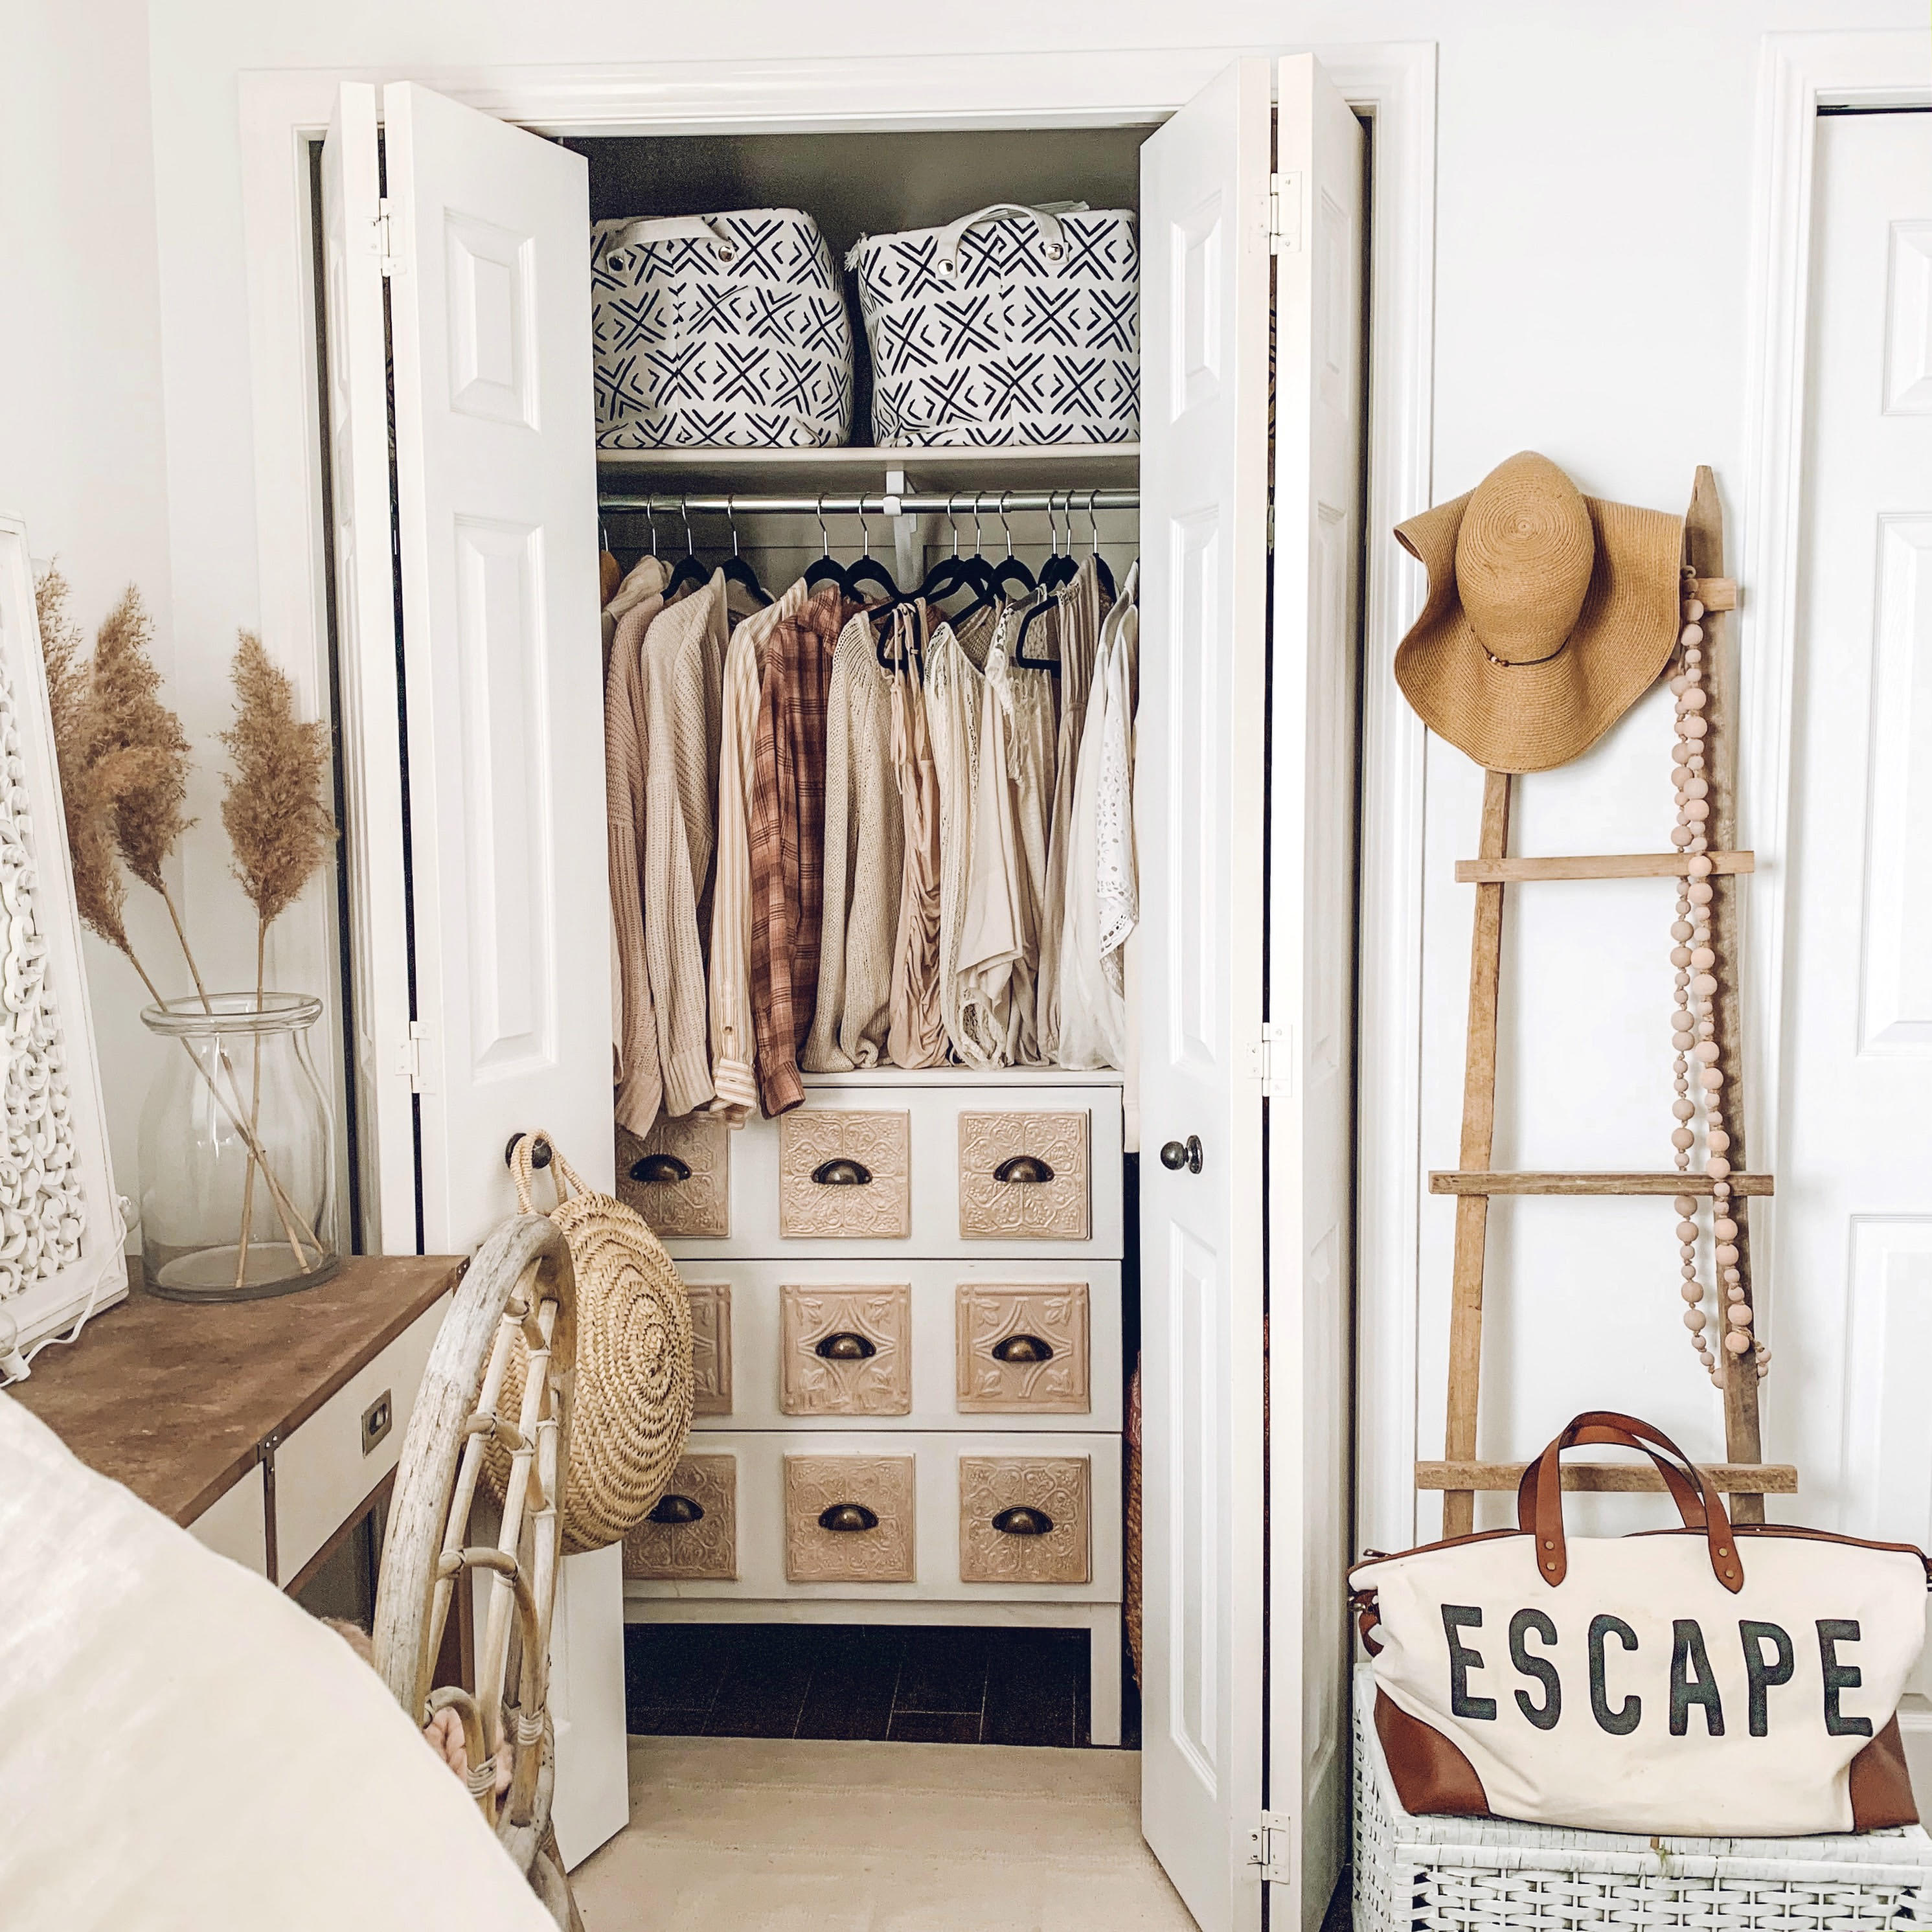 Put Your Dresser in the Closet to Maximize Bedroom Space